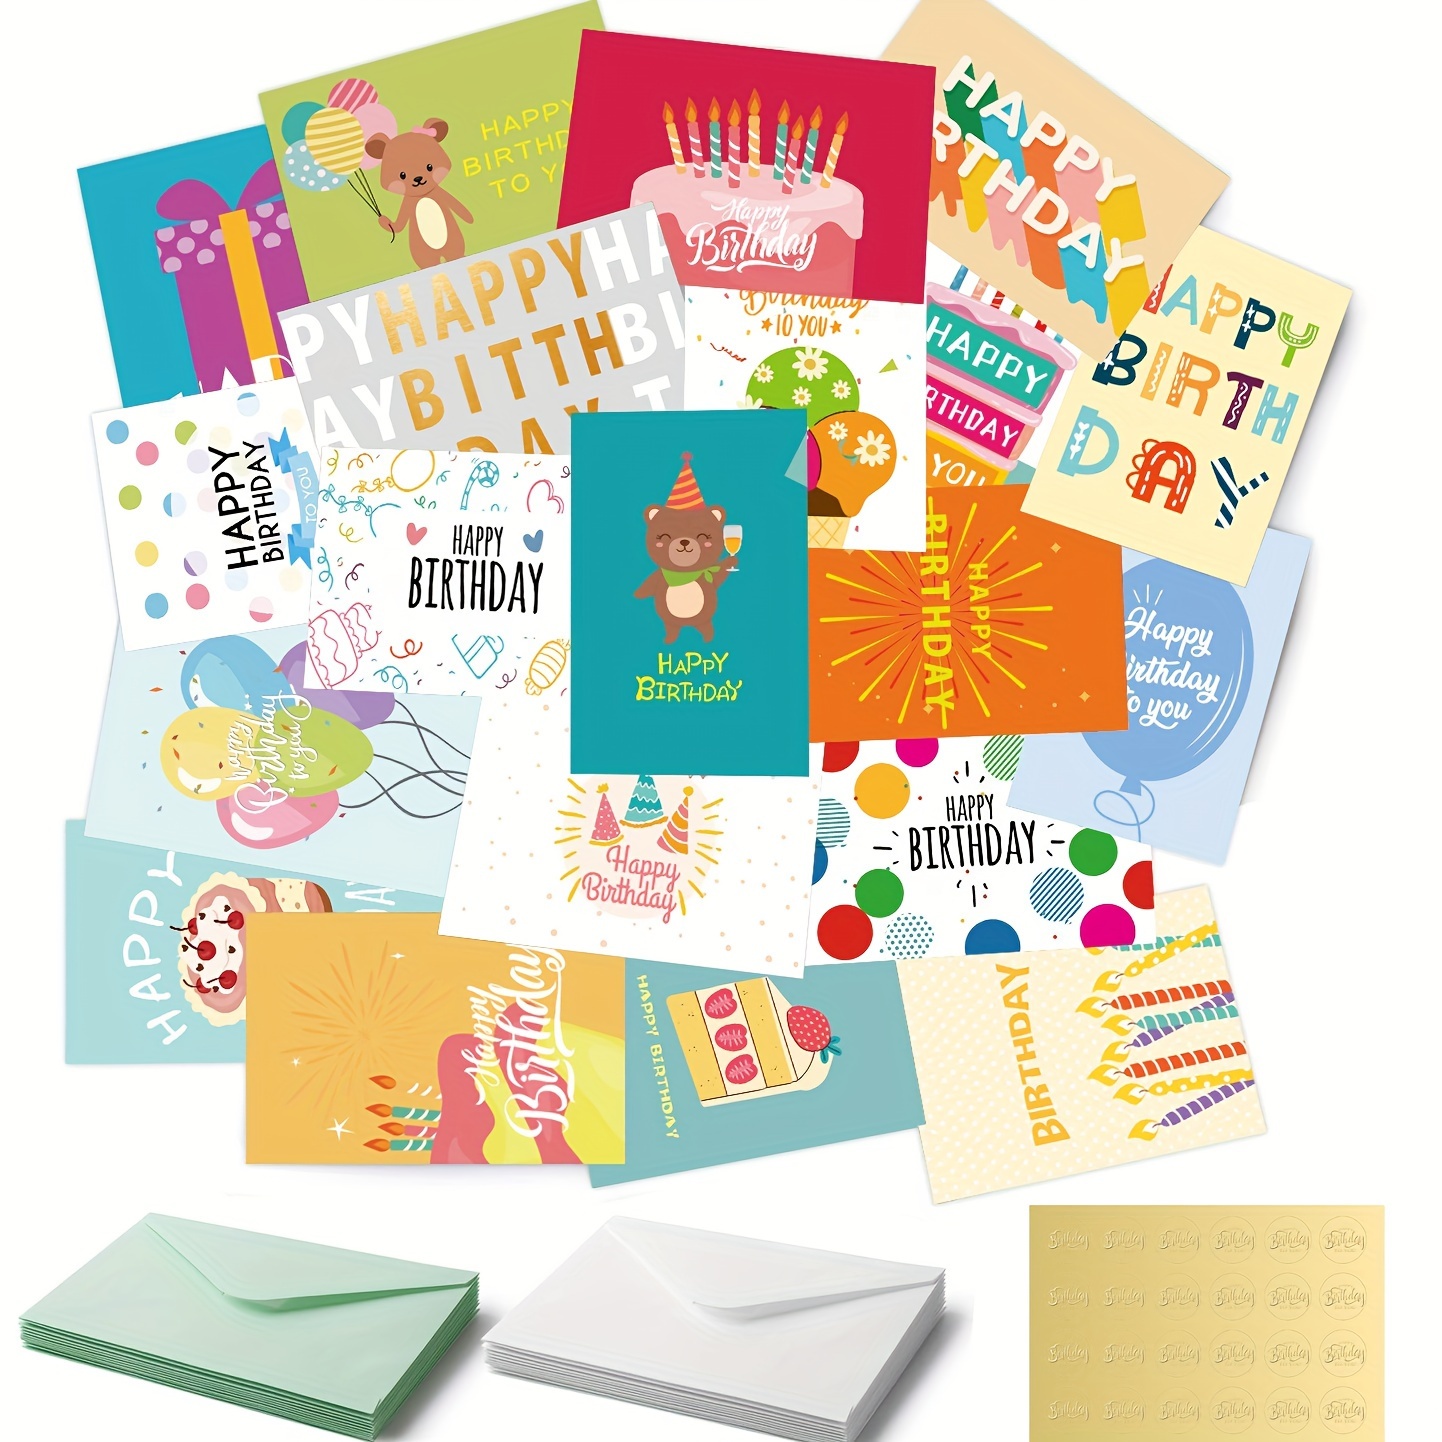 

24 Unique Birthday Cards, Gold Foil Happy Birthday Cards Bulk With Envelopes And Stickers, 4x6 Inch Assorted Blank Birthday Greeting Cards Box Set, Unisex